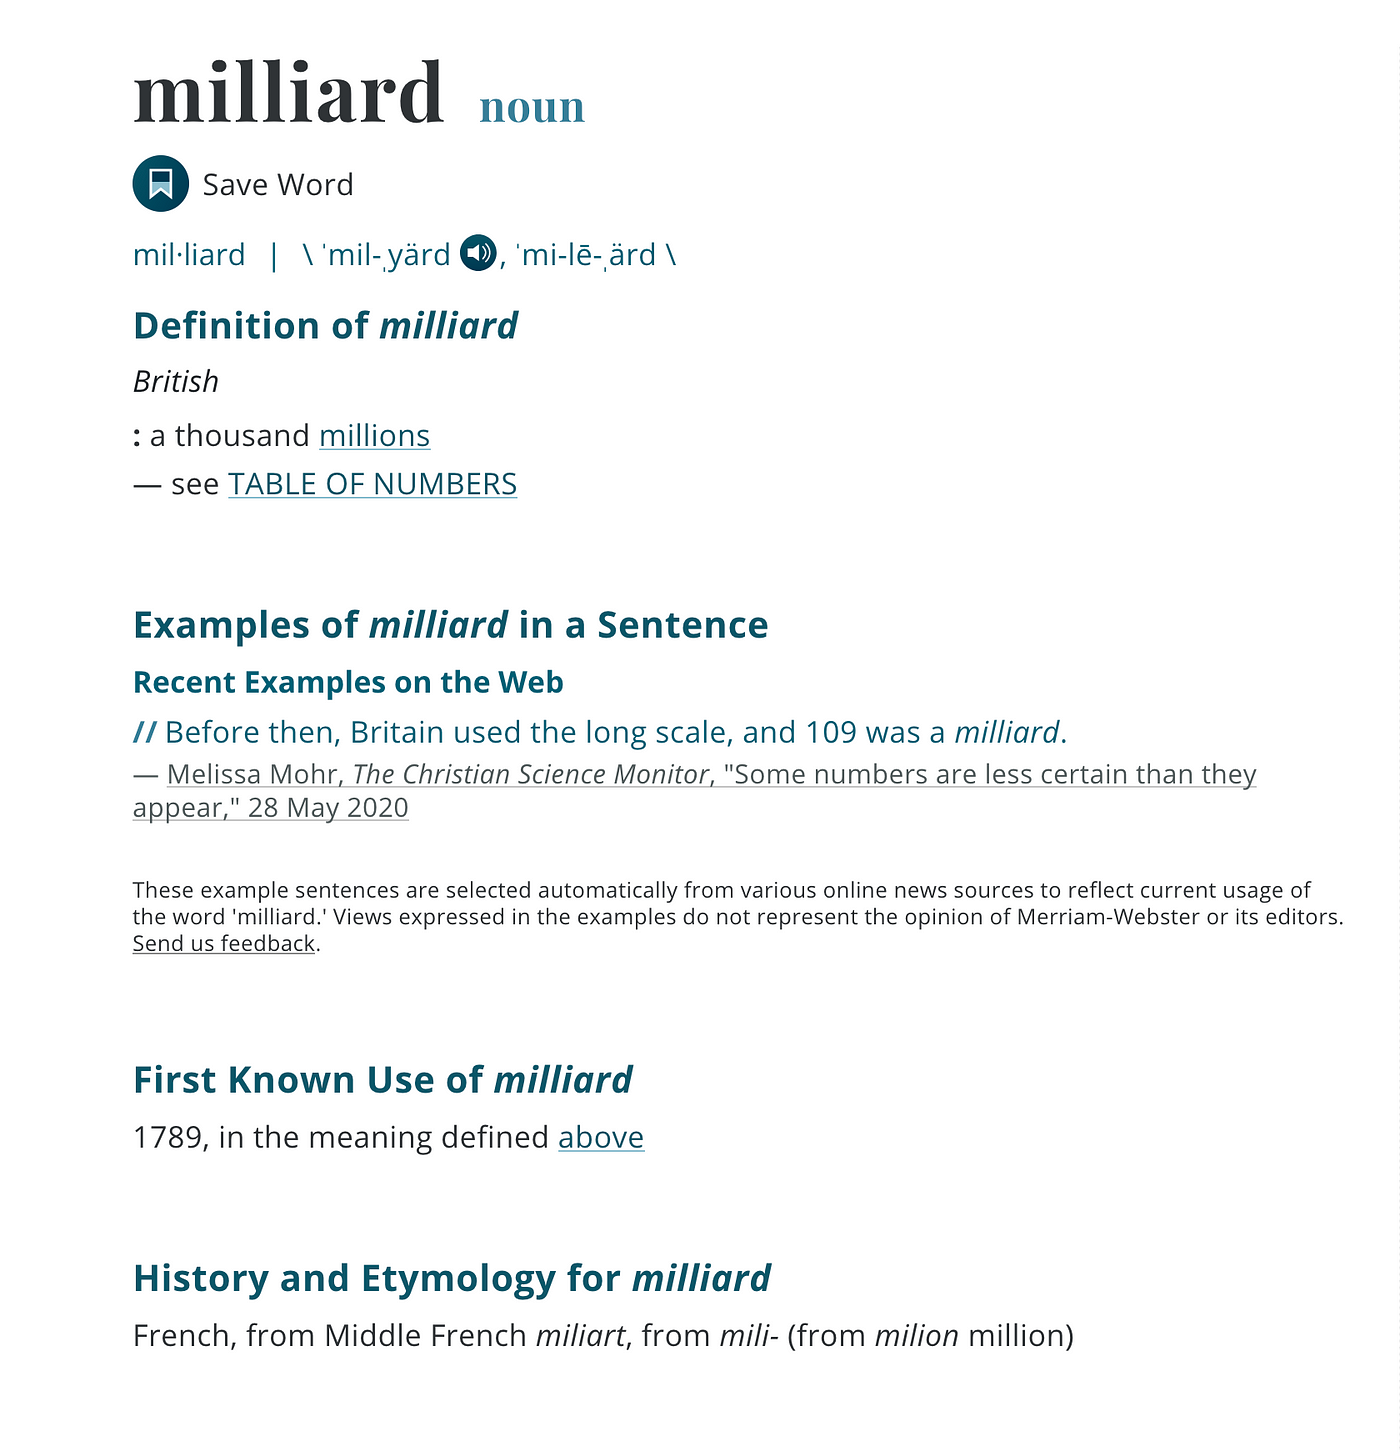 Milliard, or, as some preschoolers call it: one thousand millions